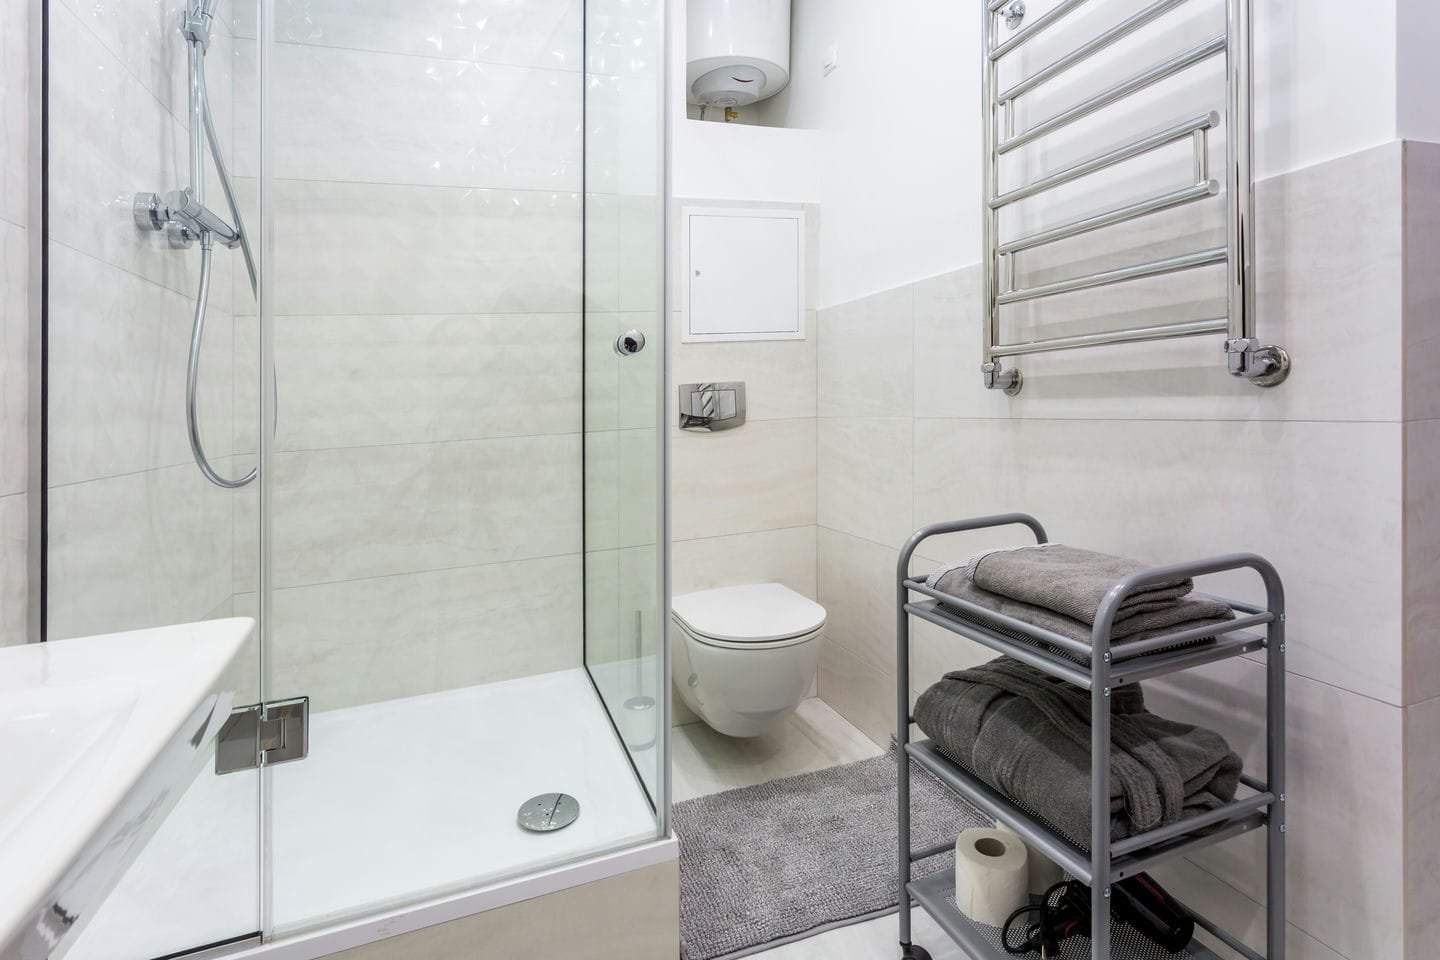 Professional Bathroom Remodeling Services in Fox Point, WI